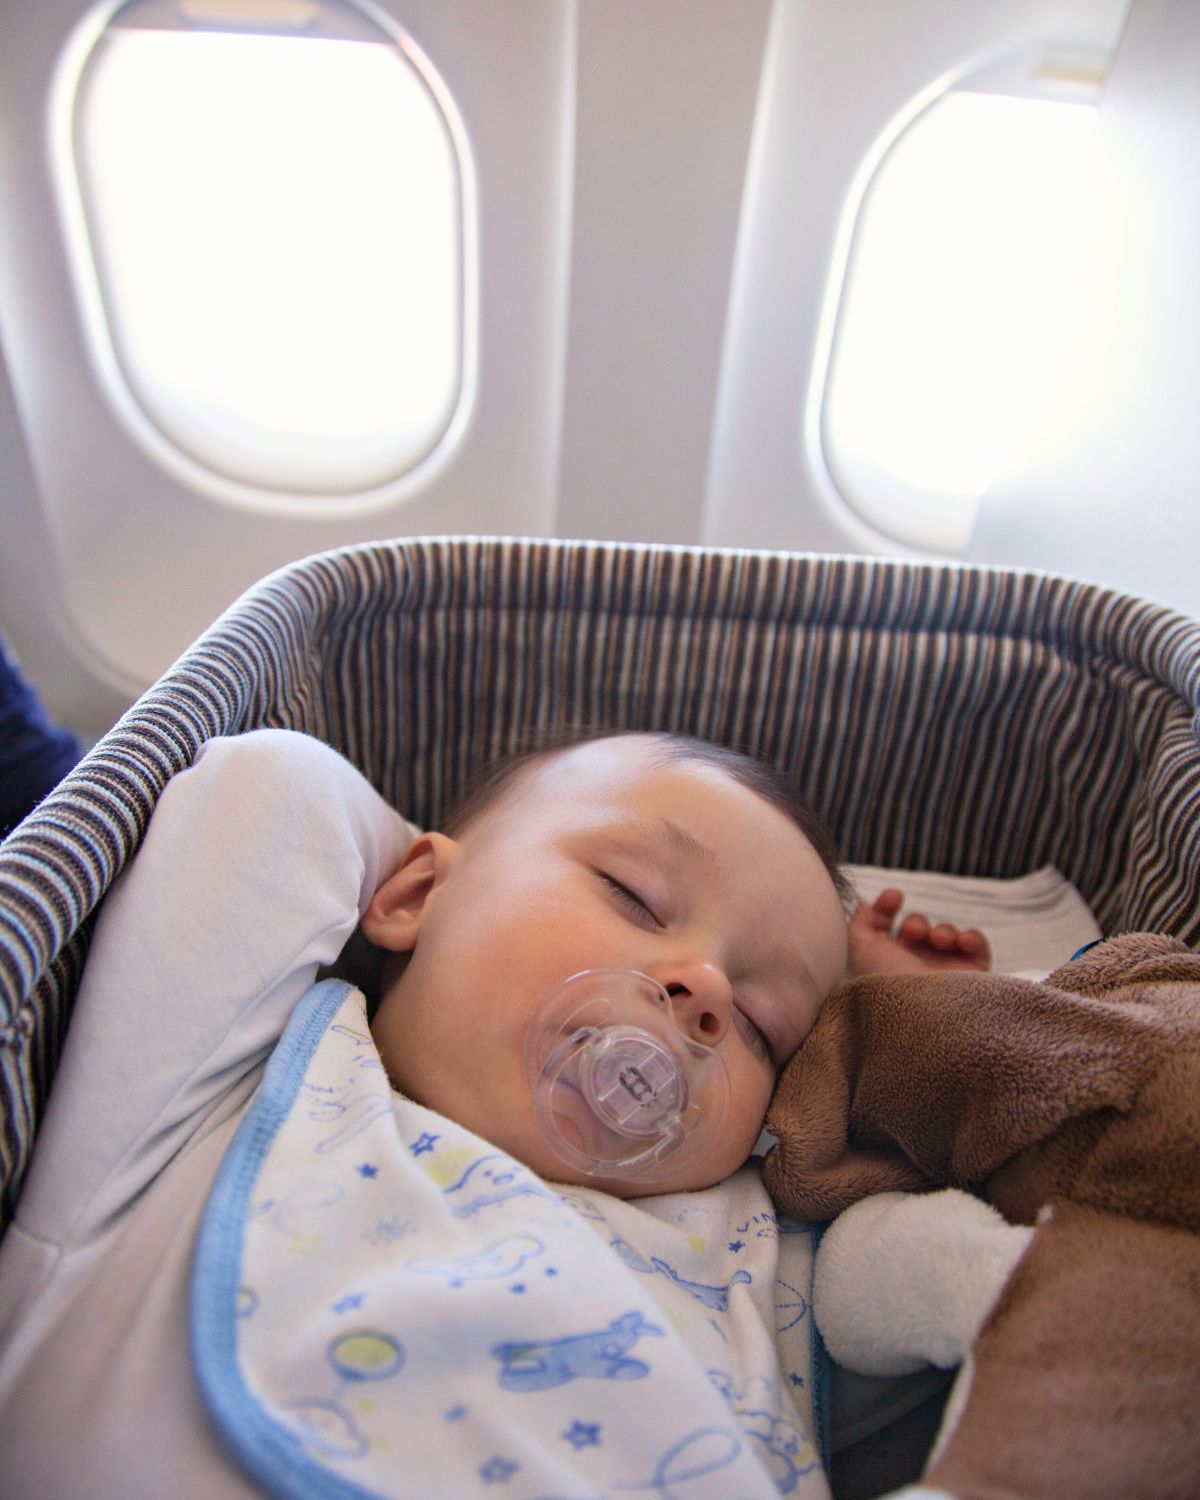 11 Genius Airplane Travel Tips for Traveling With a Baby